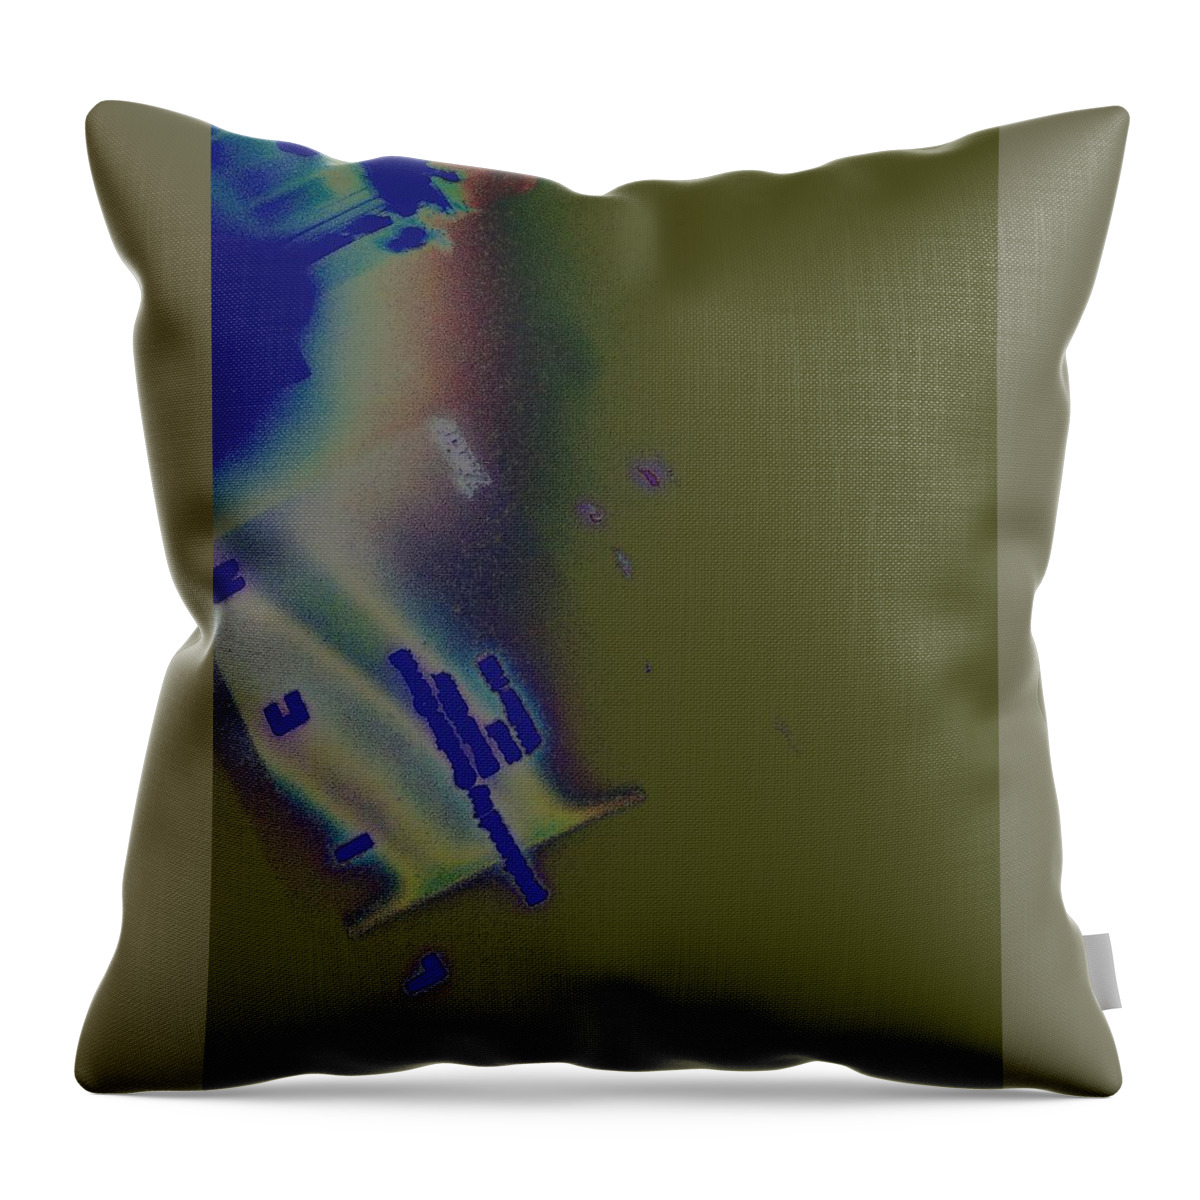 Abstract Throw Pillow featuring the digital art Plug and play by Greg Powell